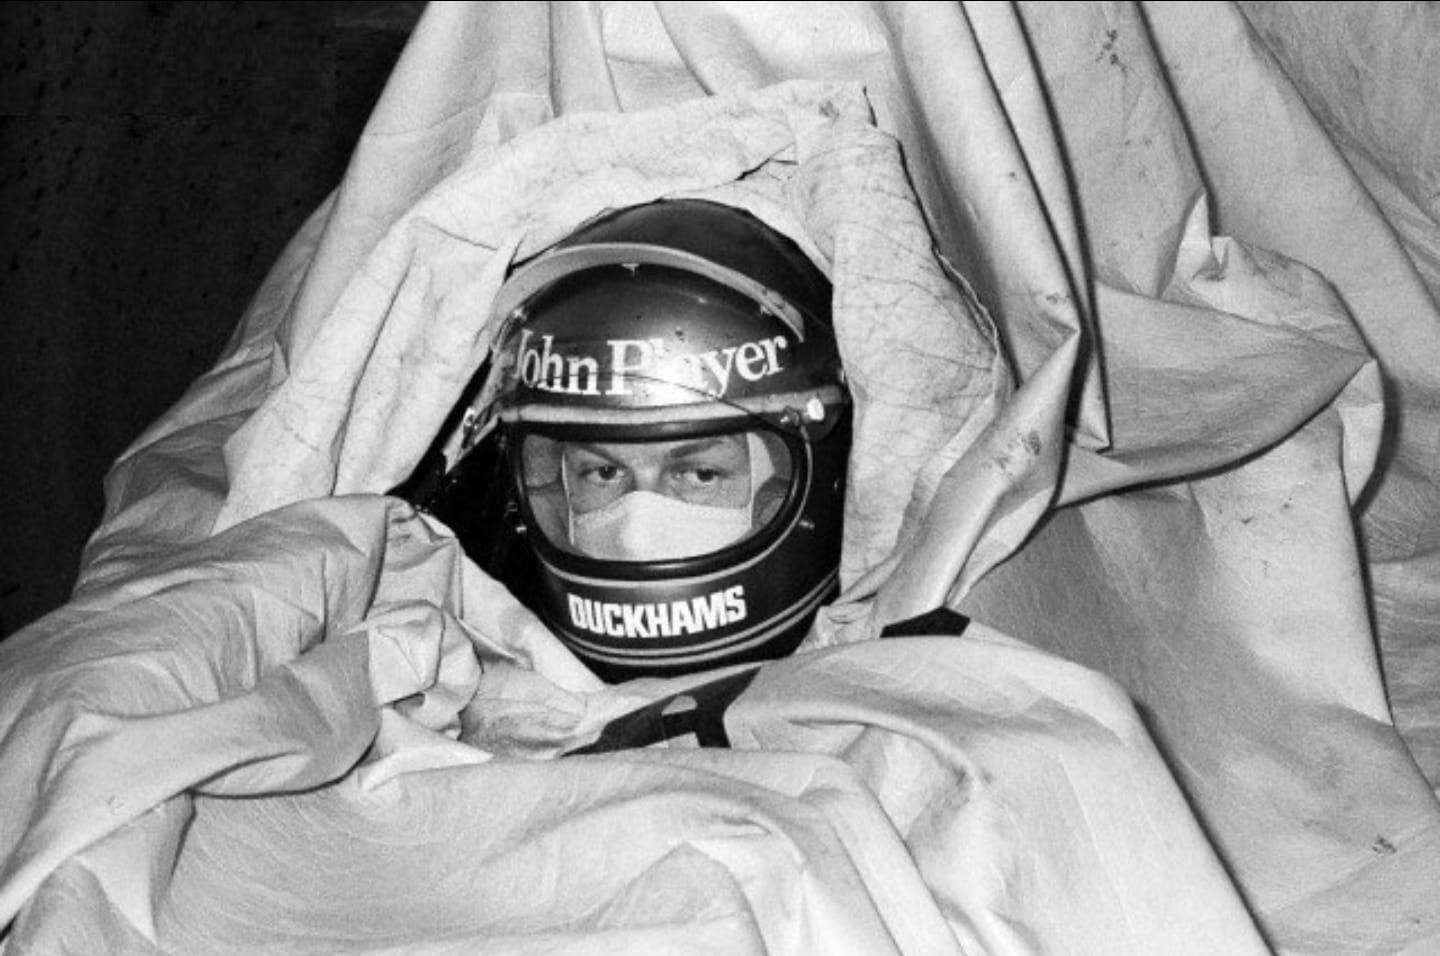 Ronnie Peterson who crashed out of the race on lap 3 in a troubled race meeting for the new Lotus 76, keeps himself well covered during a rain storm at the South African Grand Prix in Kyalami, South Africa, on 30 March 1974.